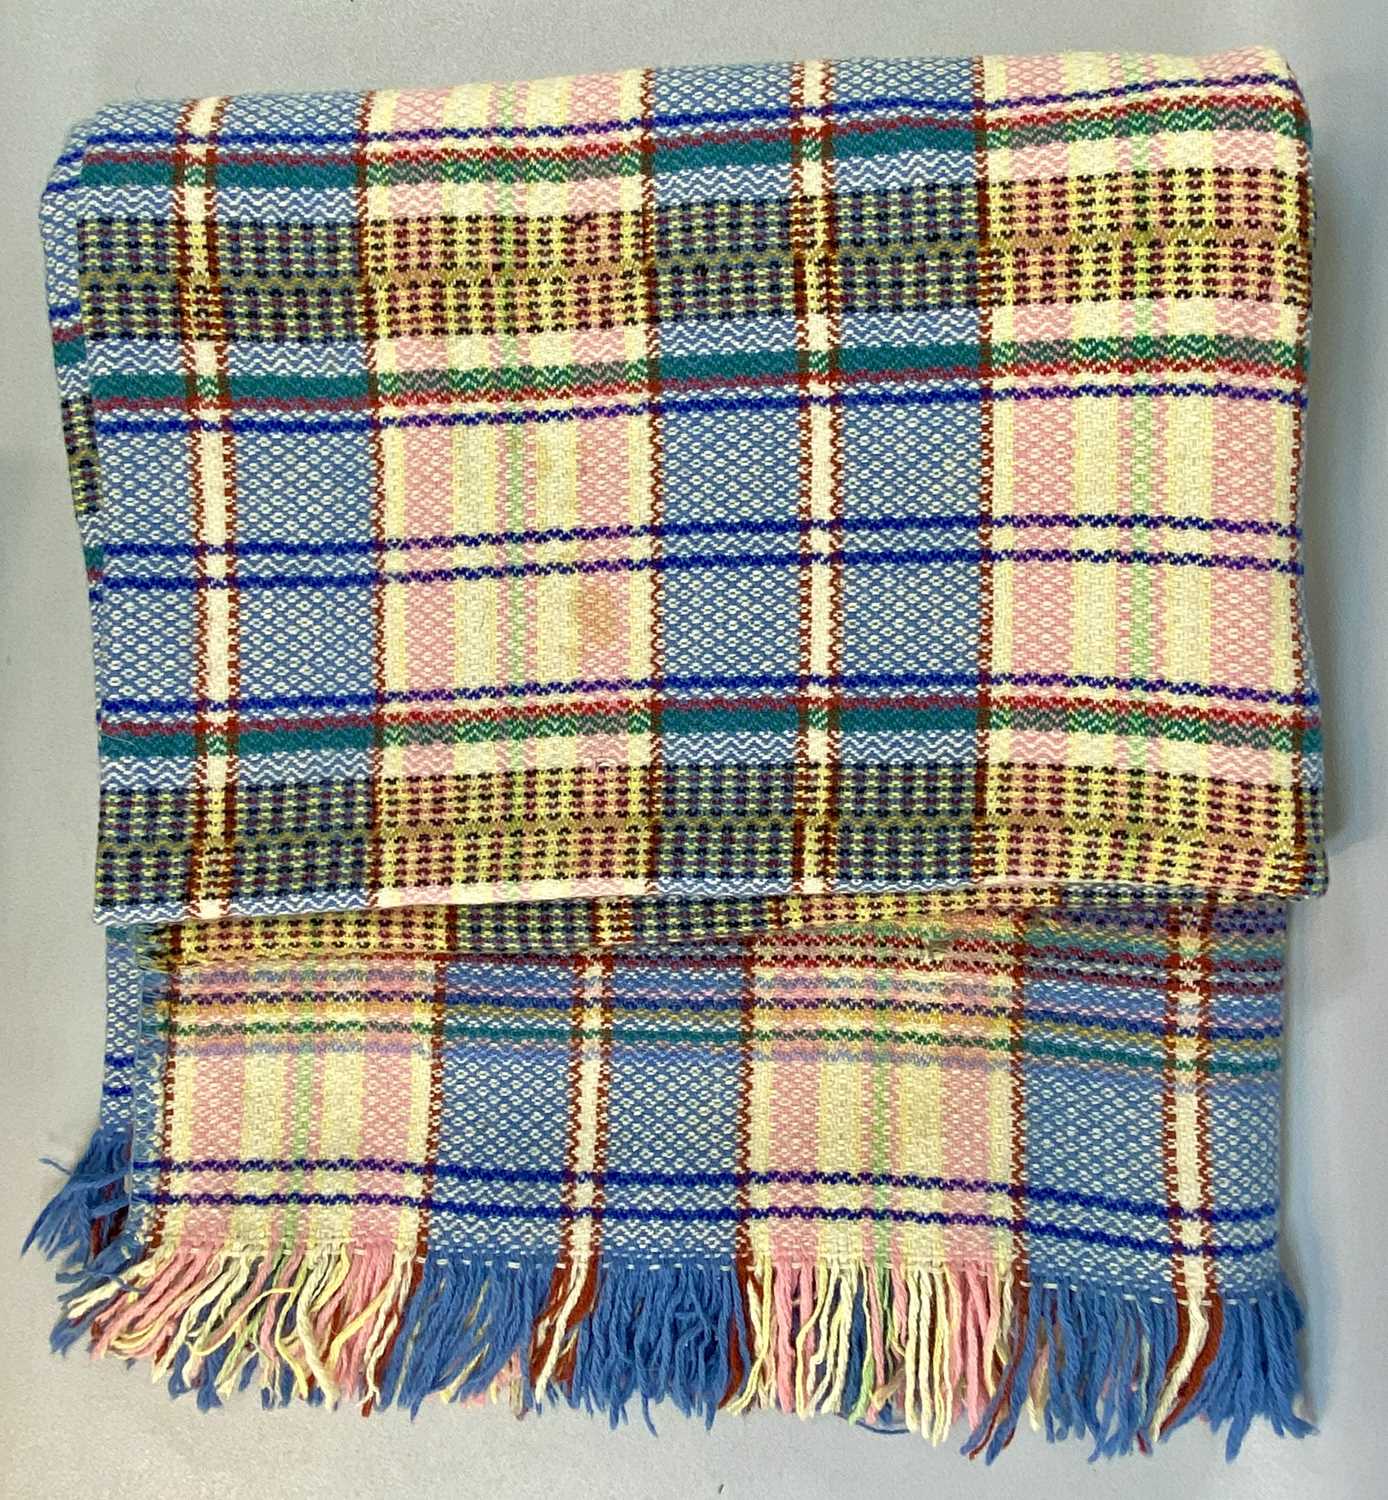 THREE VINTAGE WOOLEN BLANKETS, pink, blue, cream check pattern, double sided, fringed, 220 x 200cms, - Image 4 of 4